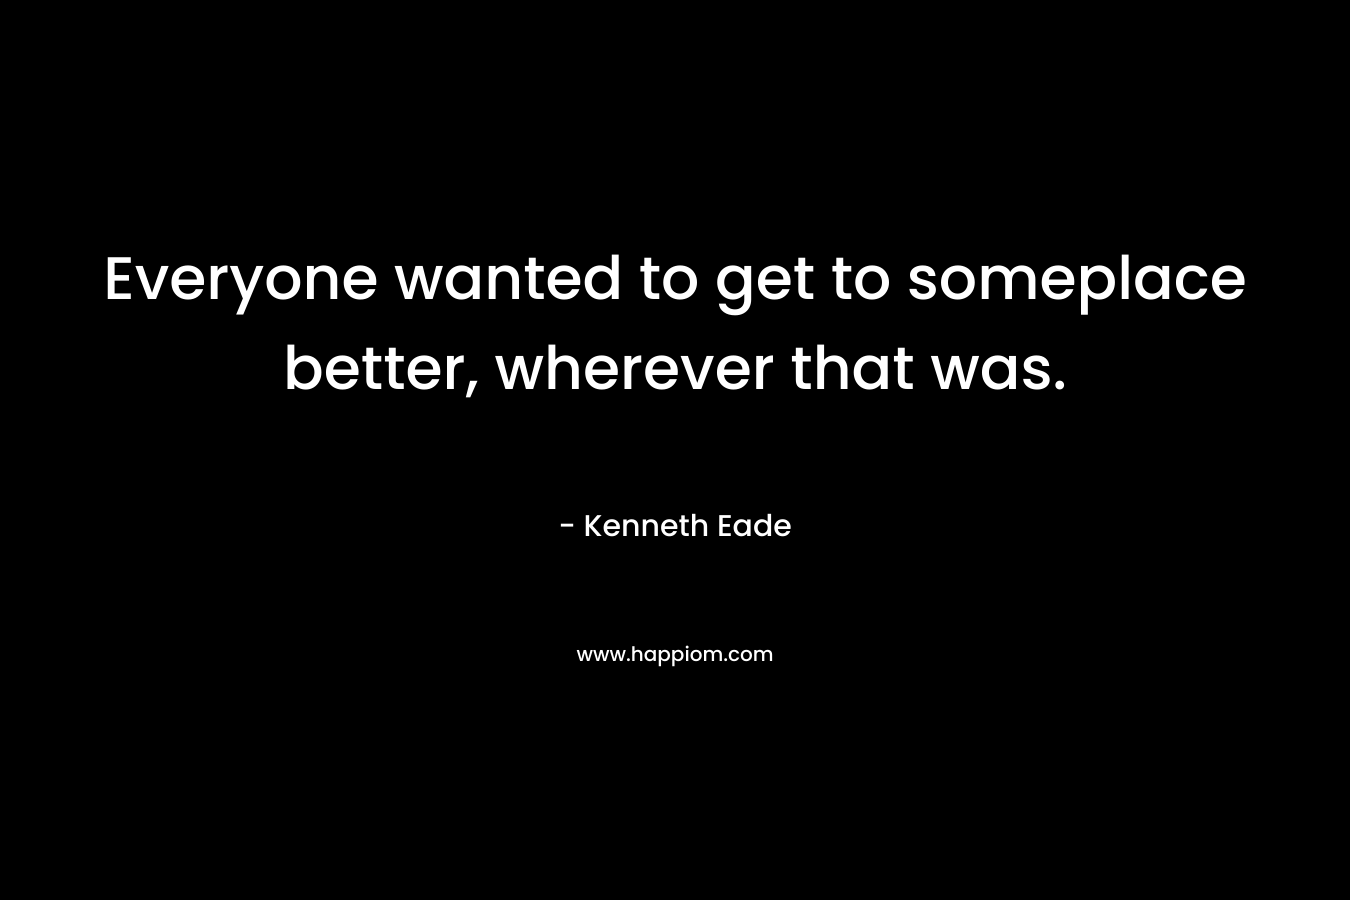 Everyone wanted to get to someplace better, wherever that was. – Kenneth Eade